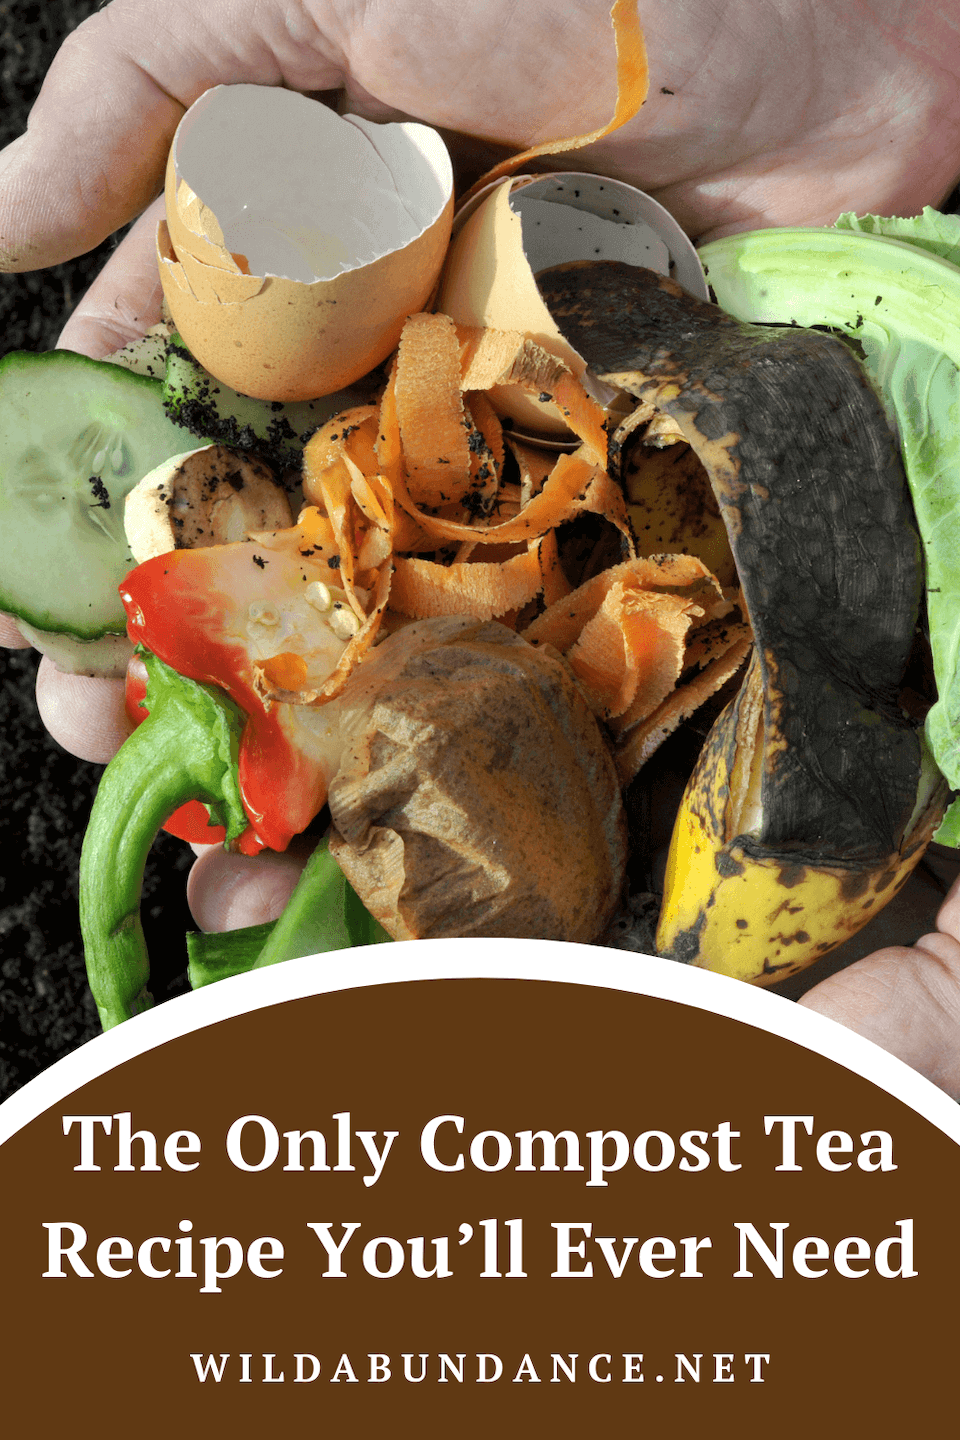 The only compost tea recipe you'll ever need